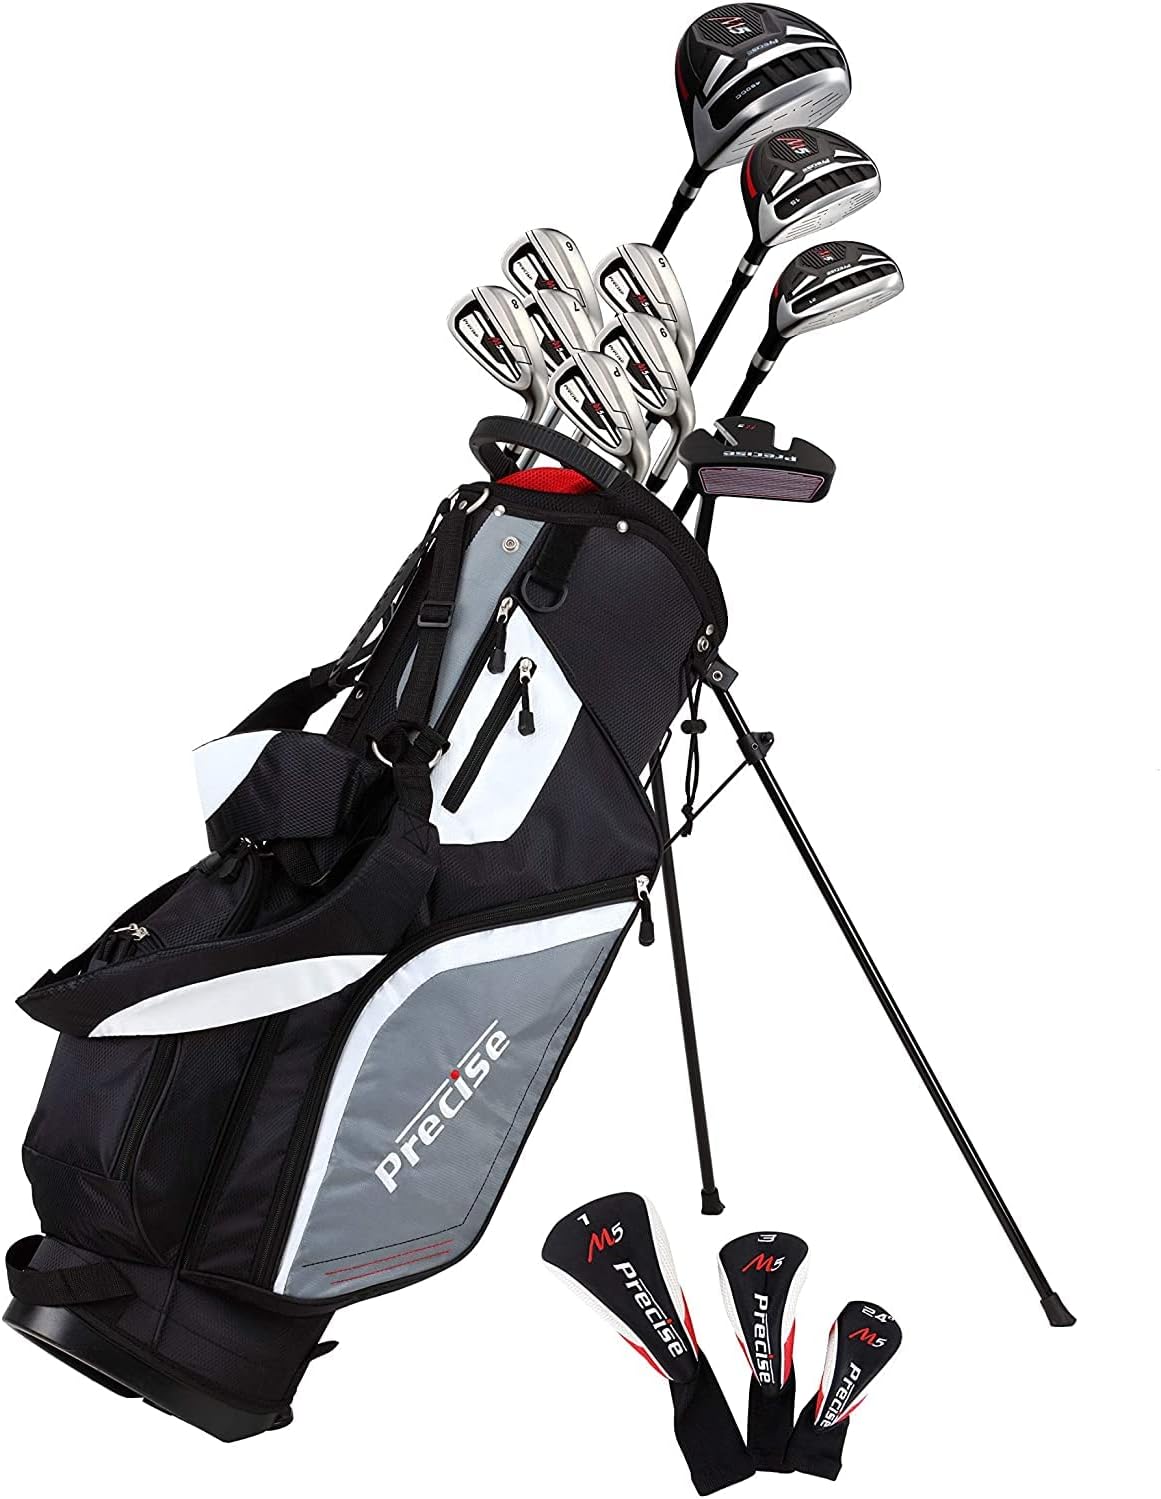 Precise M5 Golf Clubs Package Set Review